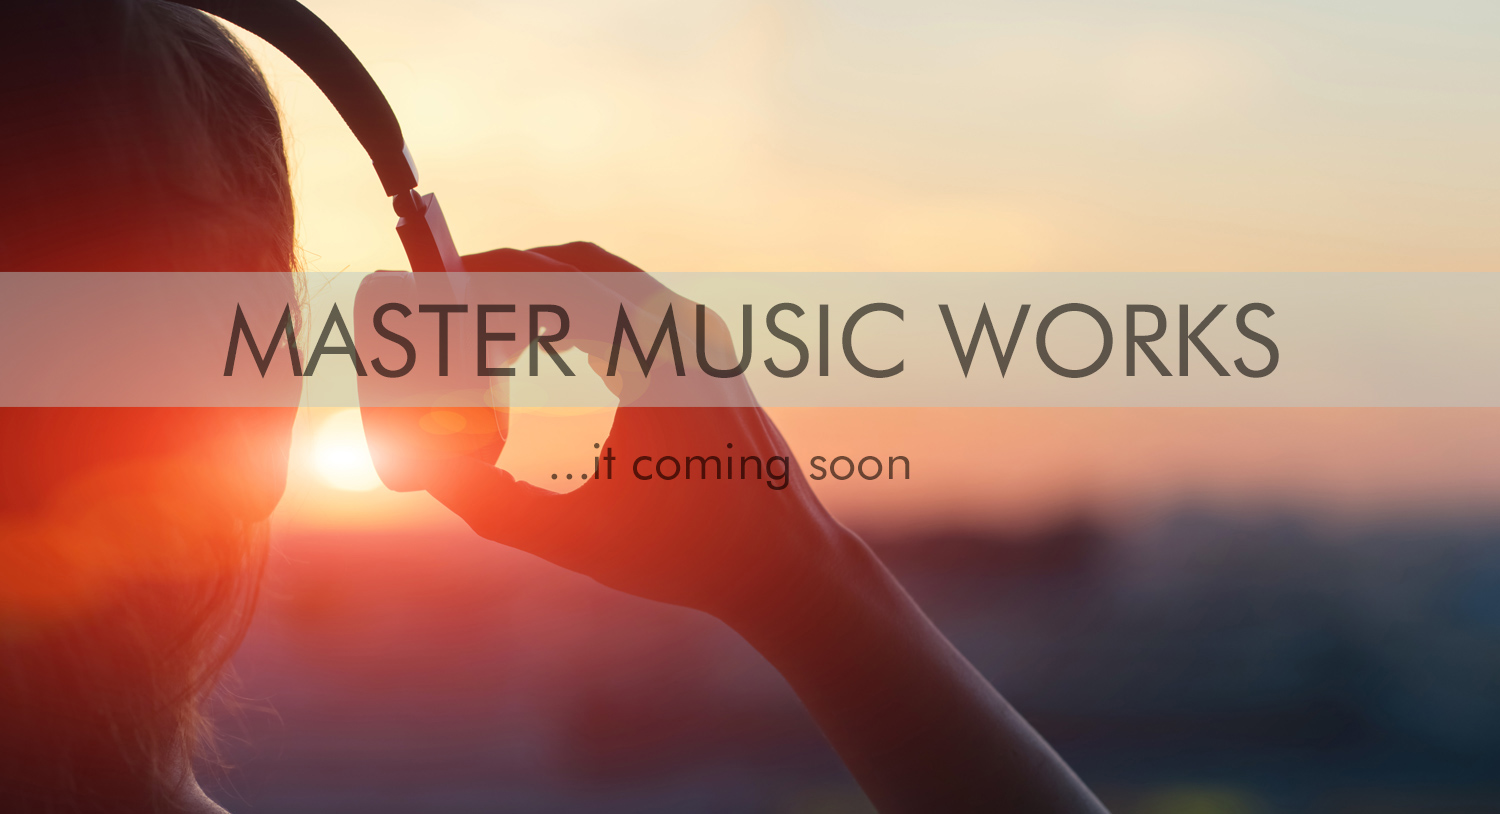 Master Music Works ...it coming soon